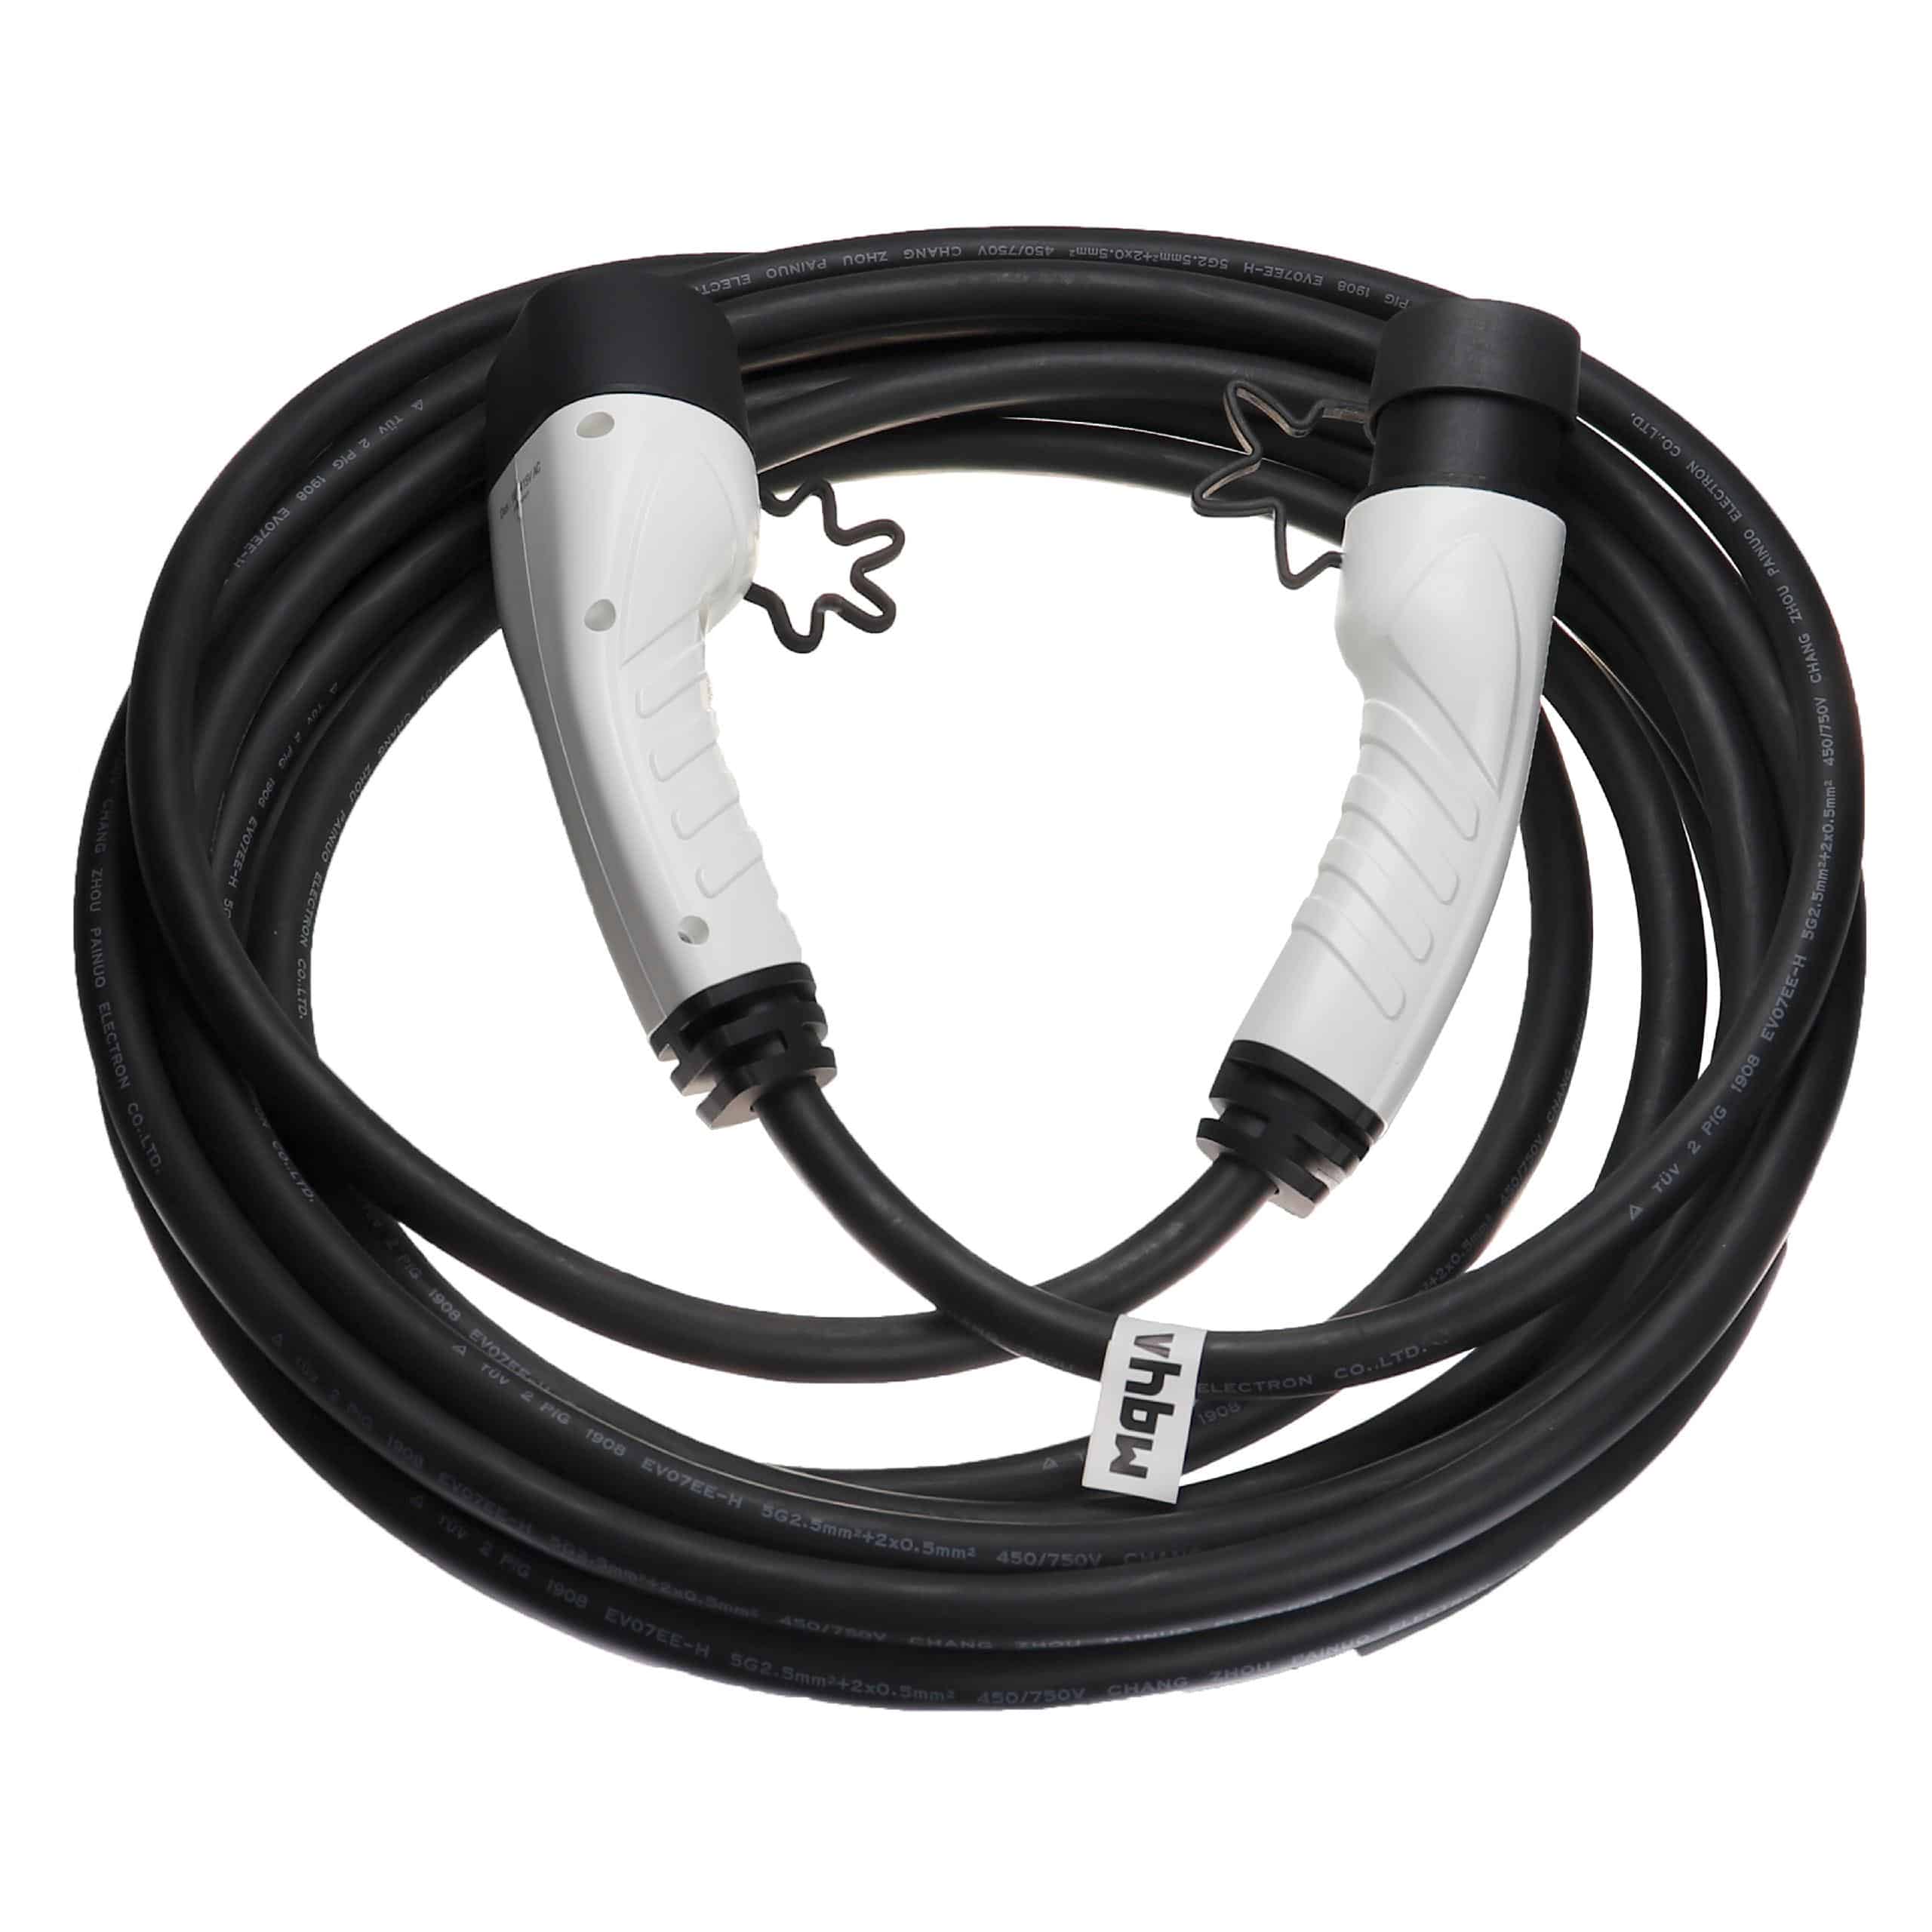 Charging Cable for Electric Car, Plug-In Hybrid - Type 2 to Type 2 Cable, 3-phase, 16 A, 11 kW, 10 m